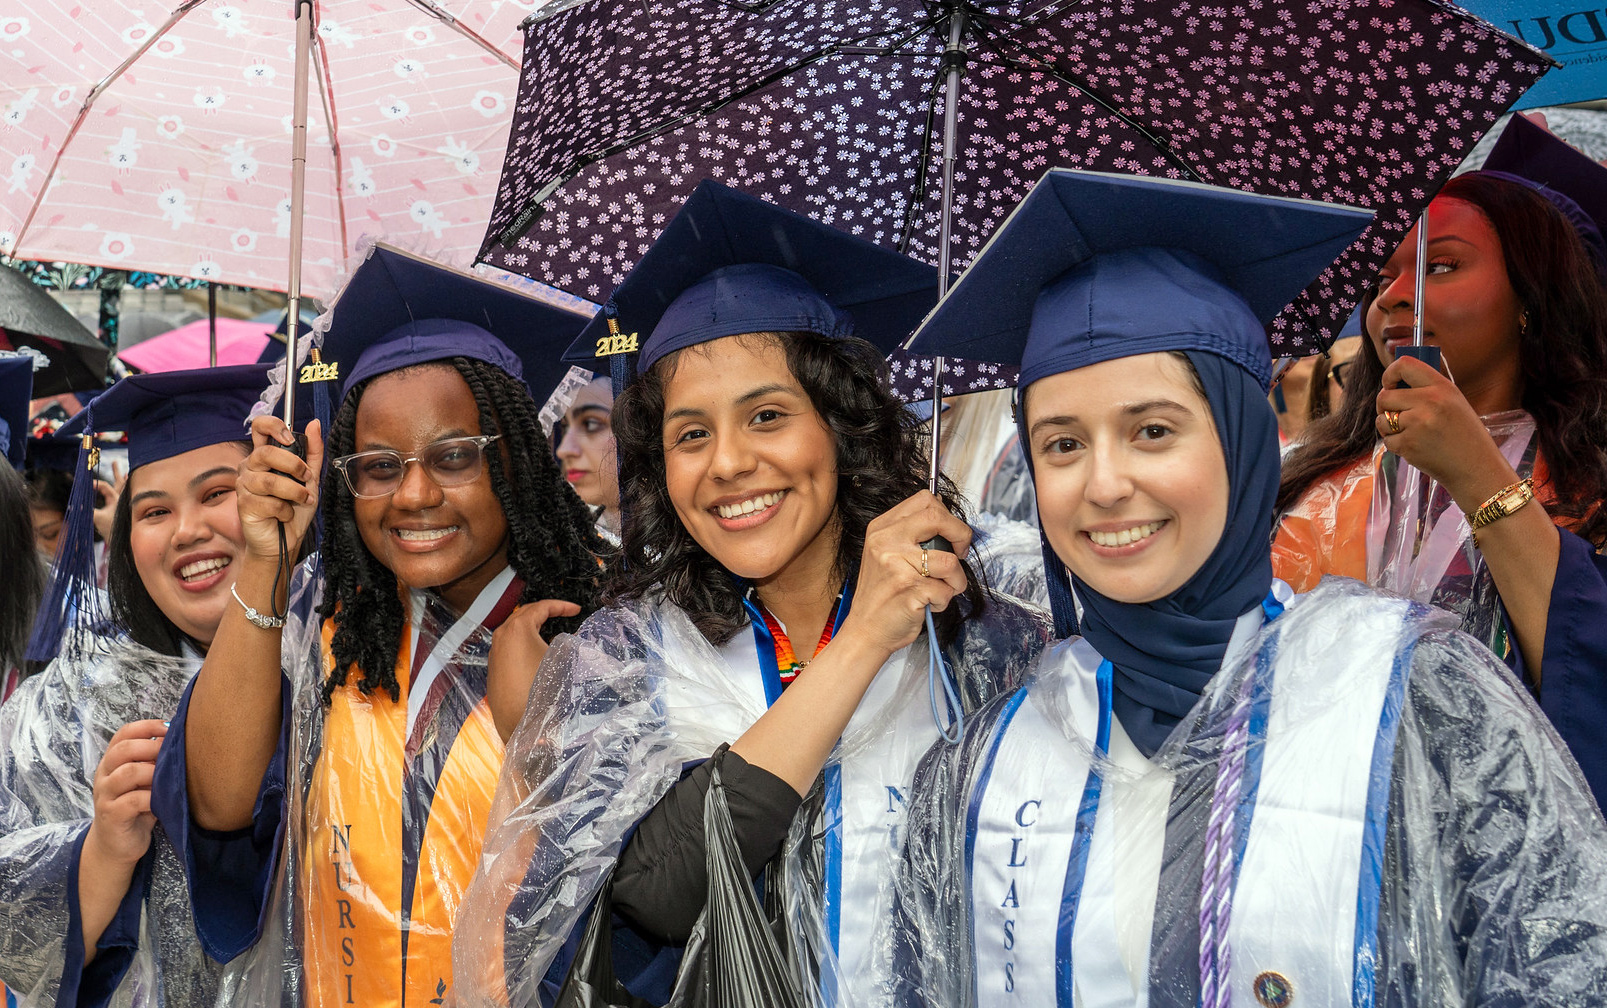 Four female graduates pose for a photo in the rain with their umbrellas.